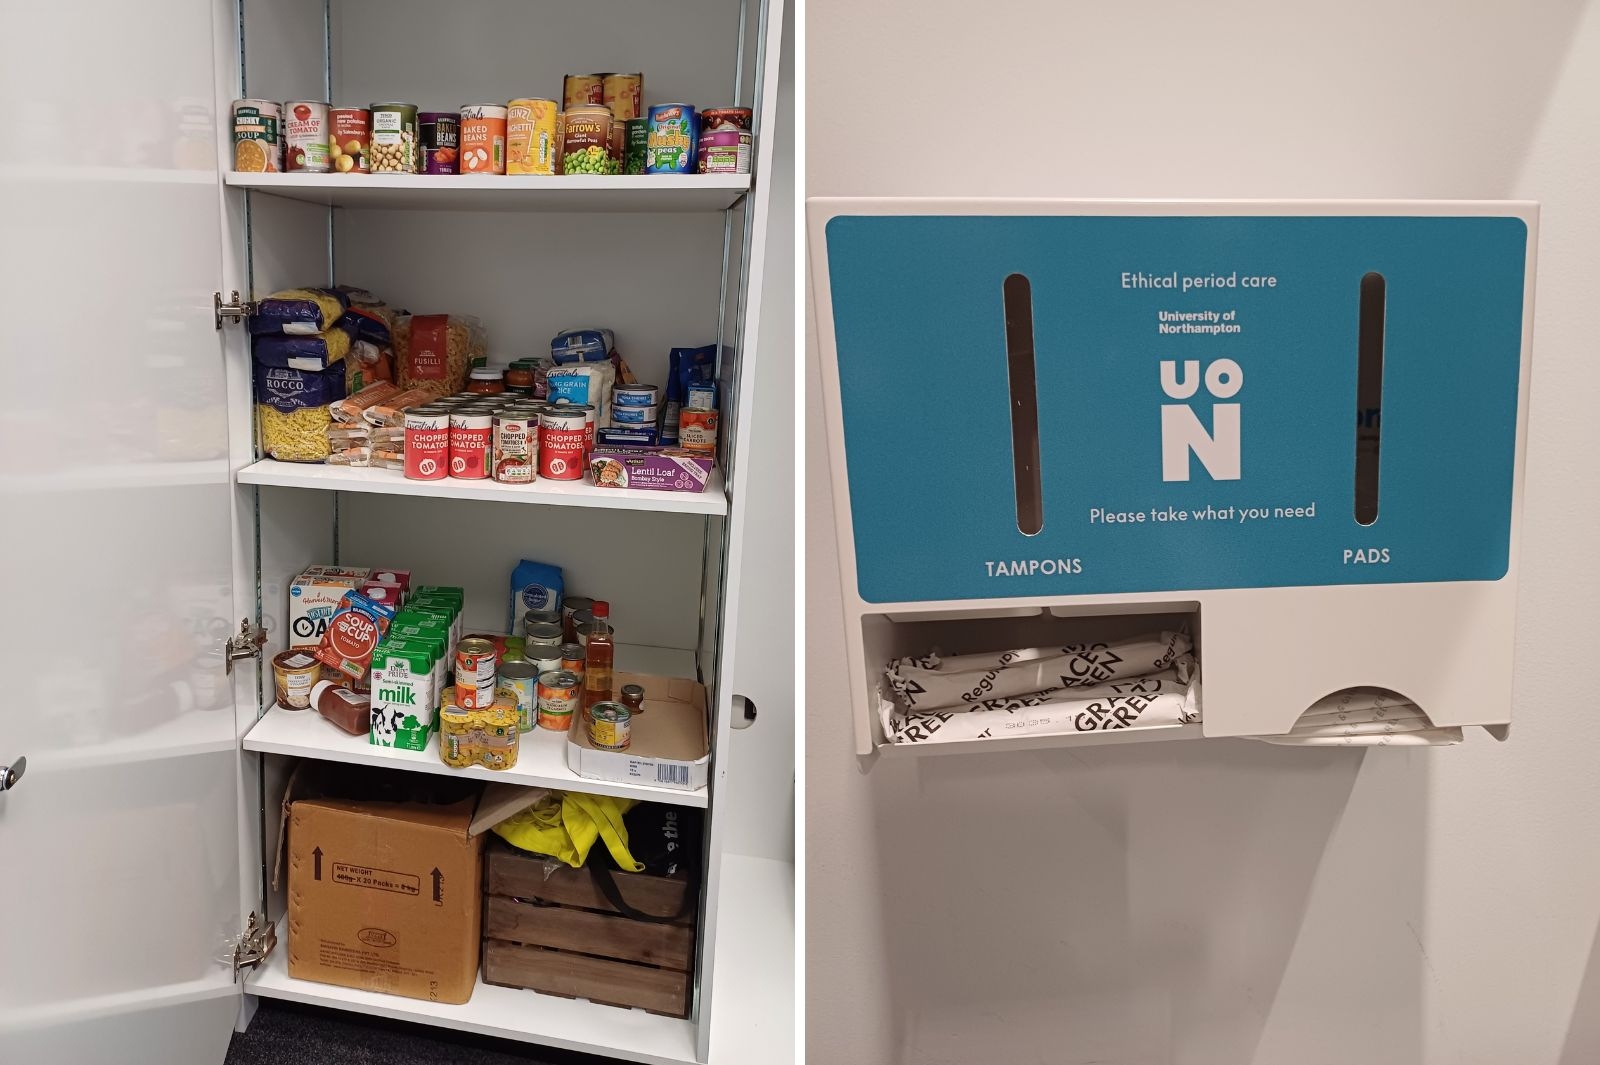 Pop Up Pantry and free sanitary products